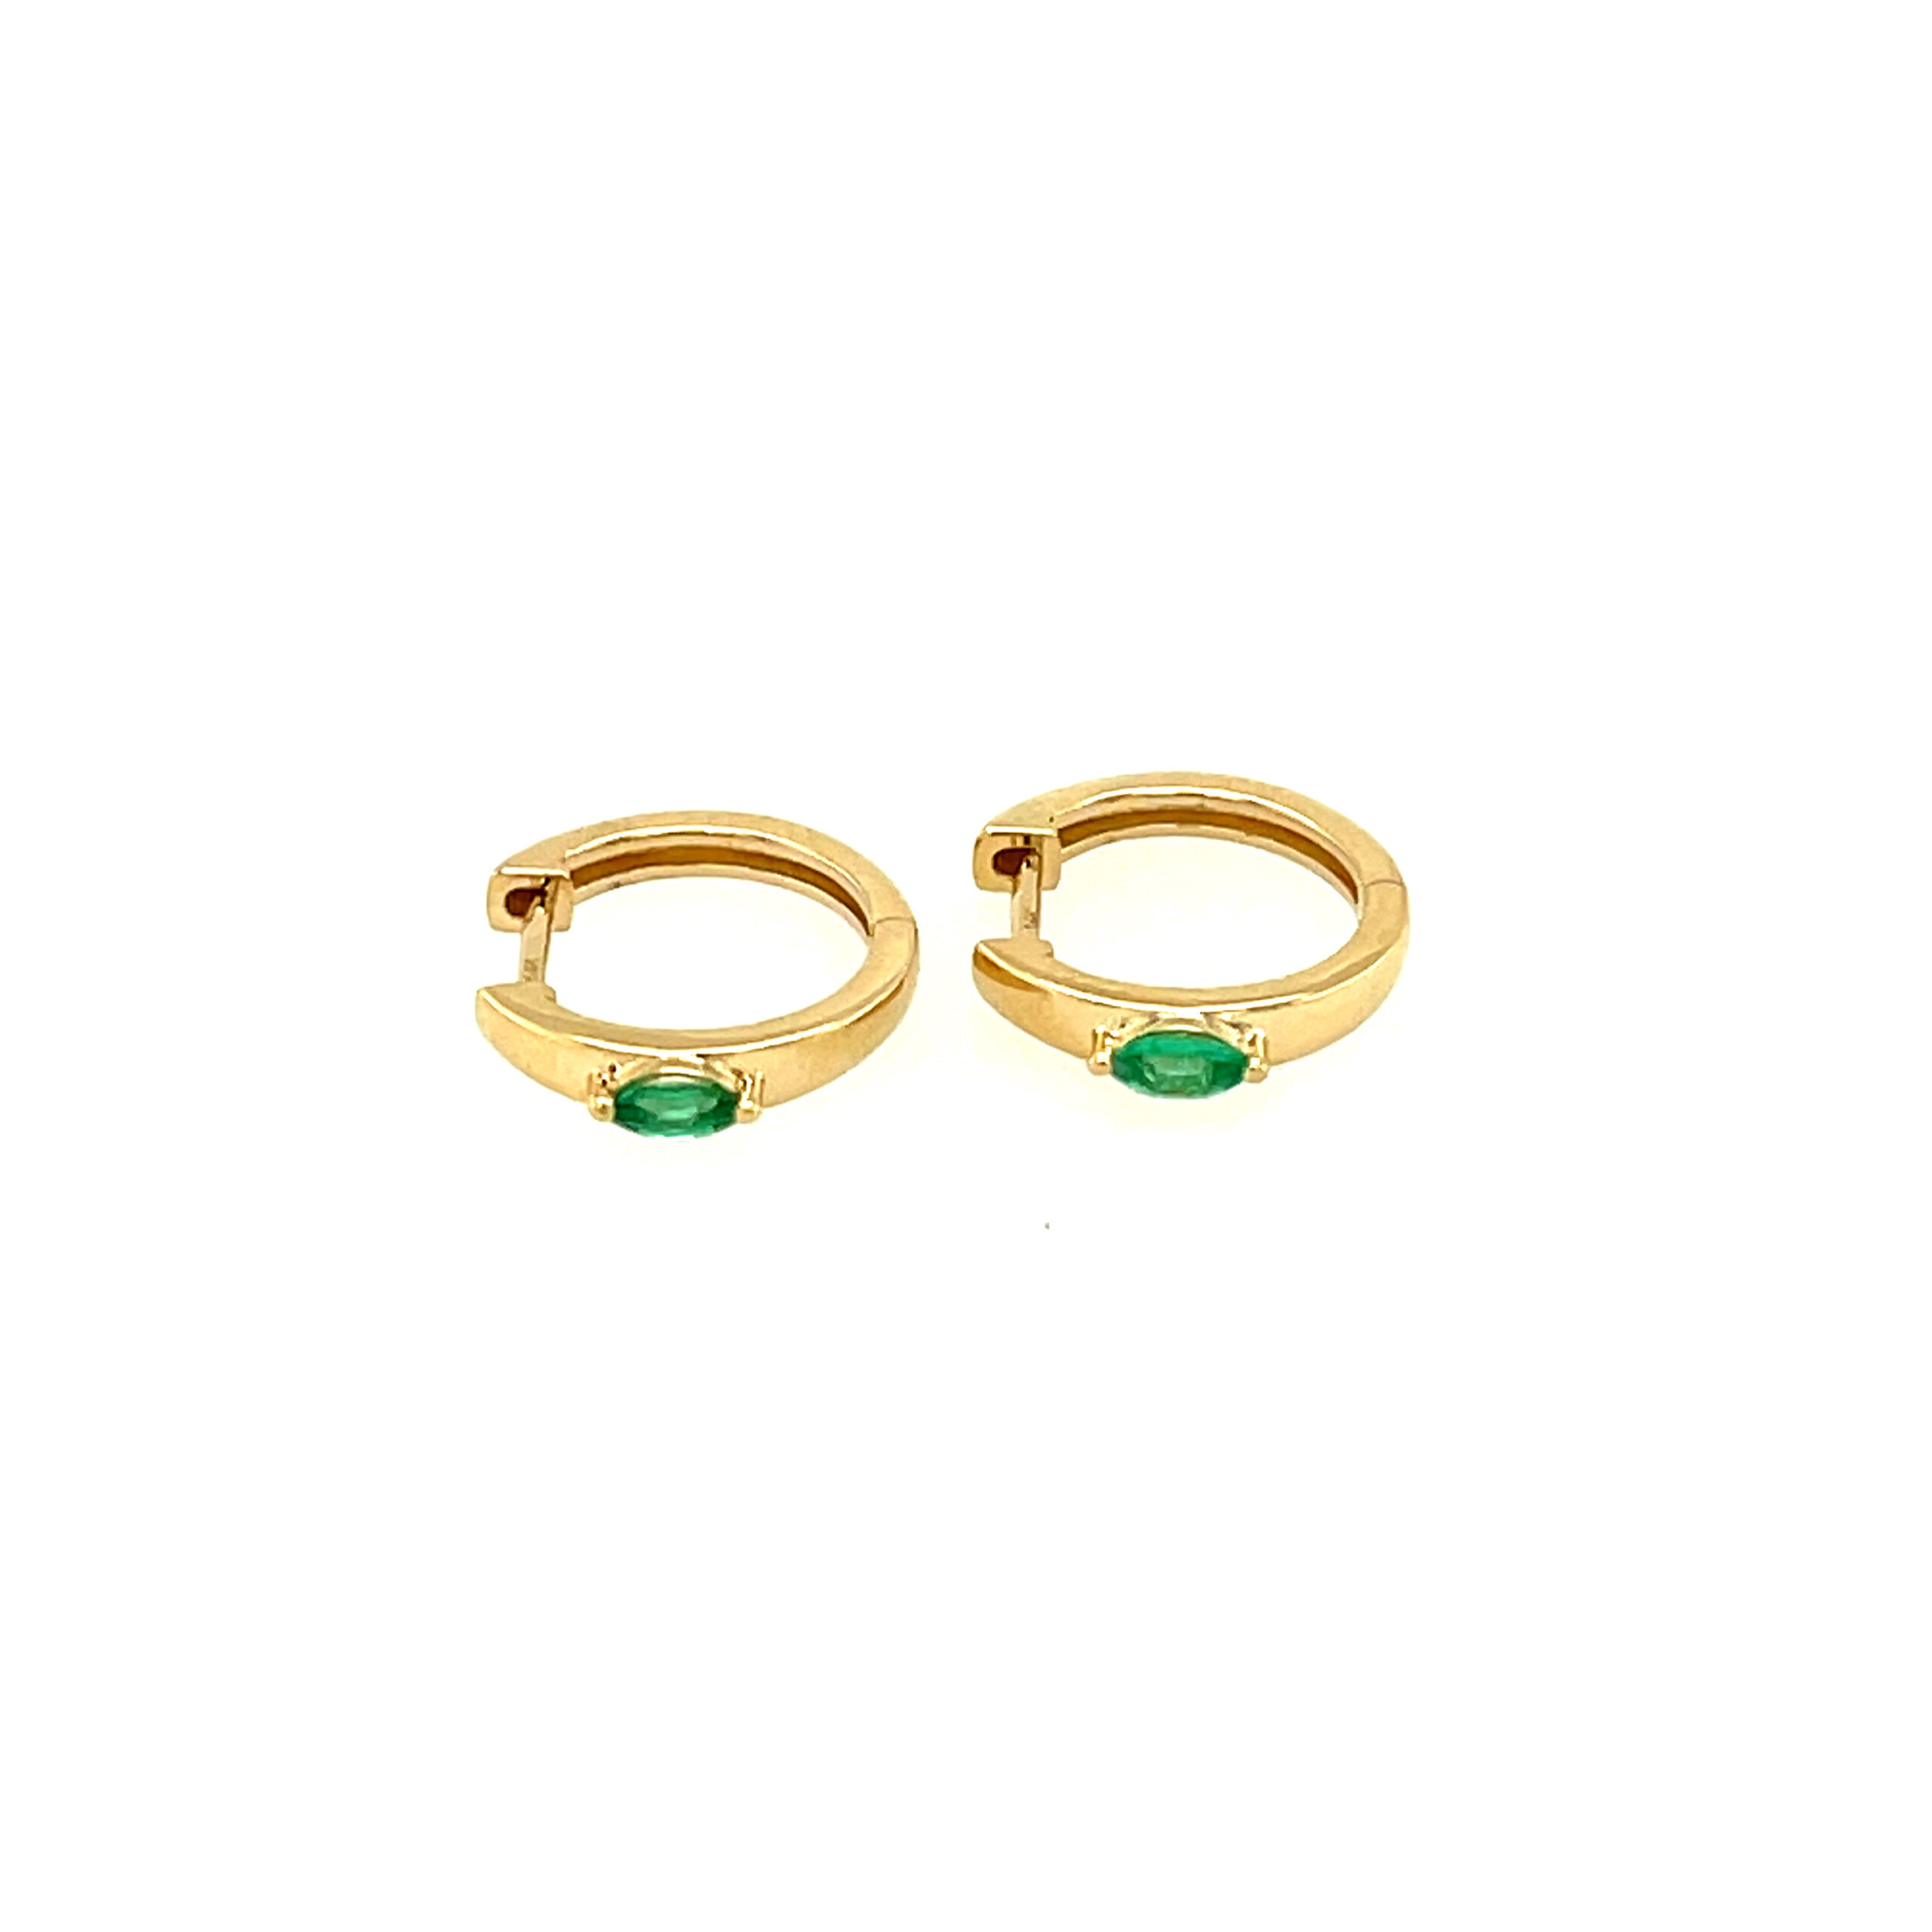 Featured image for “Small Hoops with Emerald Baguettes”